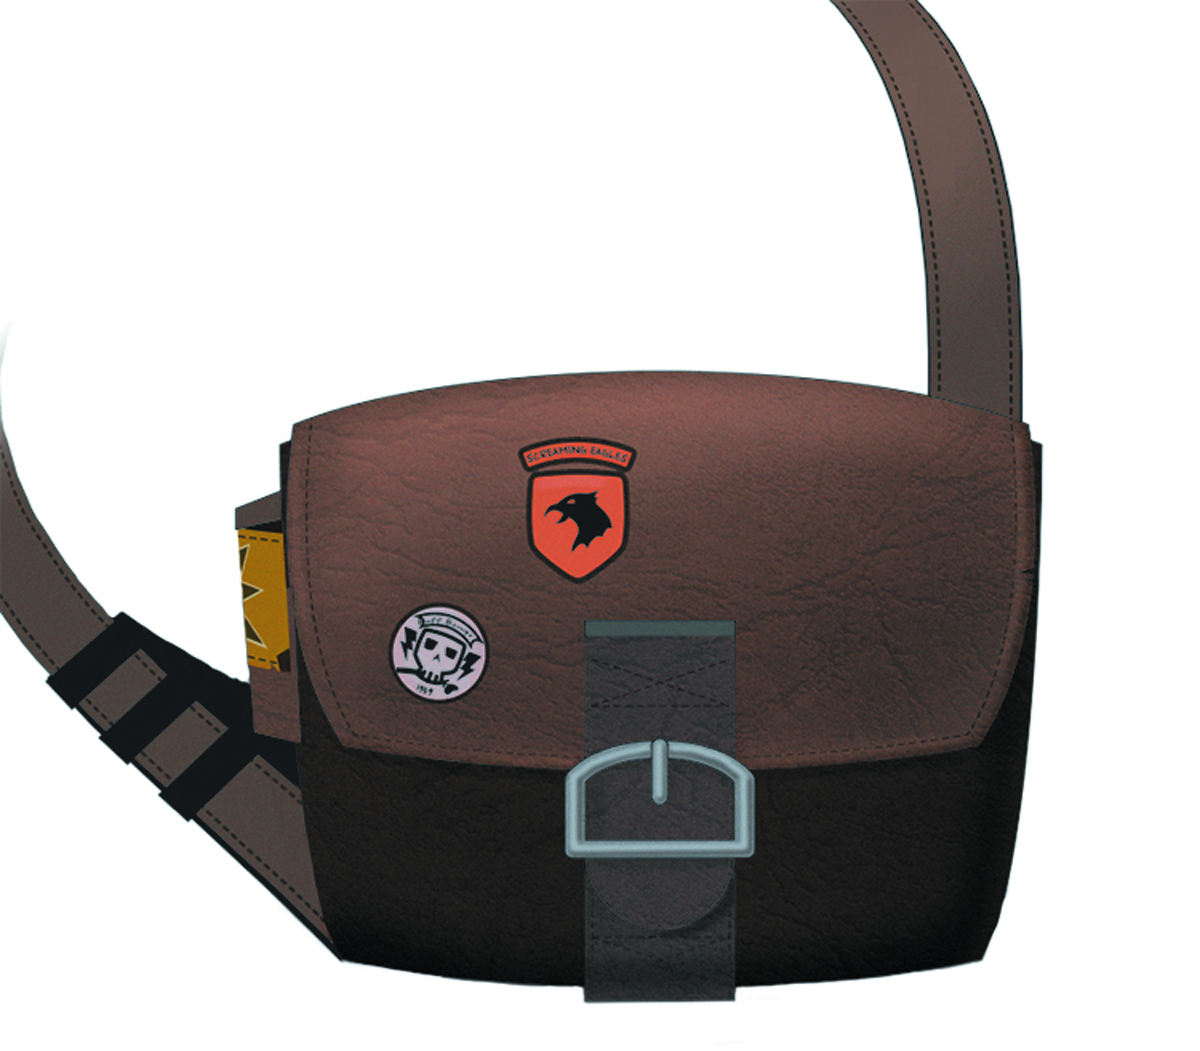 TF2 BlogTeam Fortress 2 Update Released - Gaming News - backpack